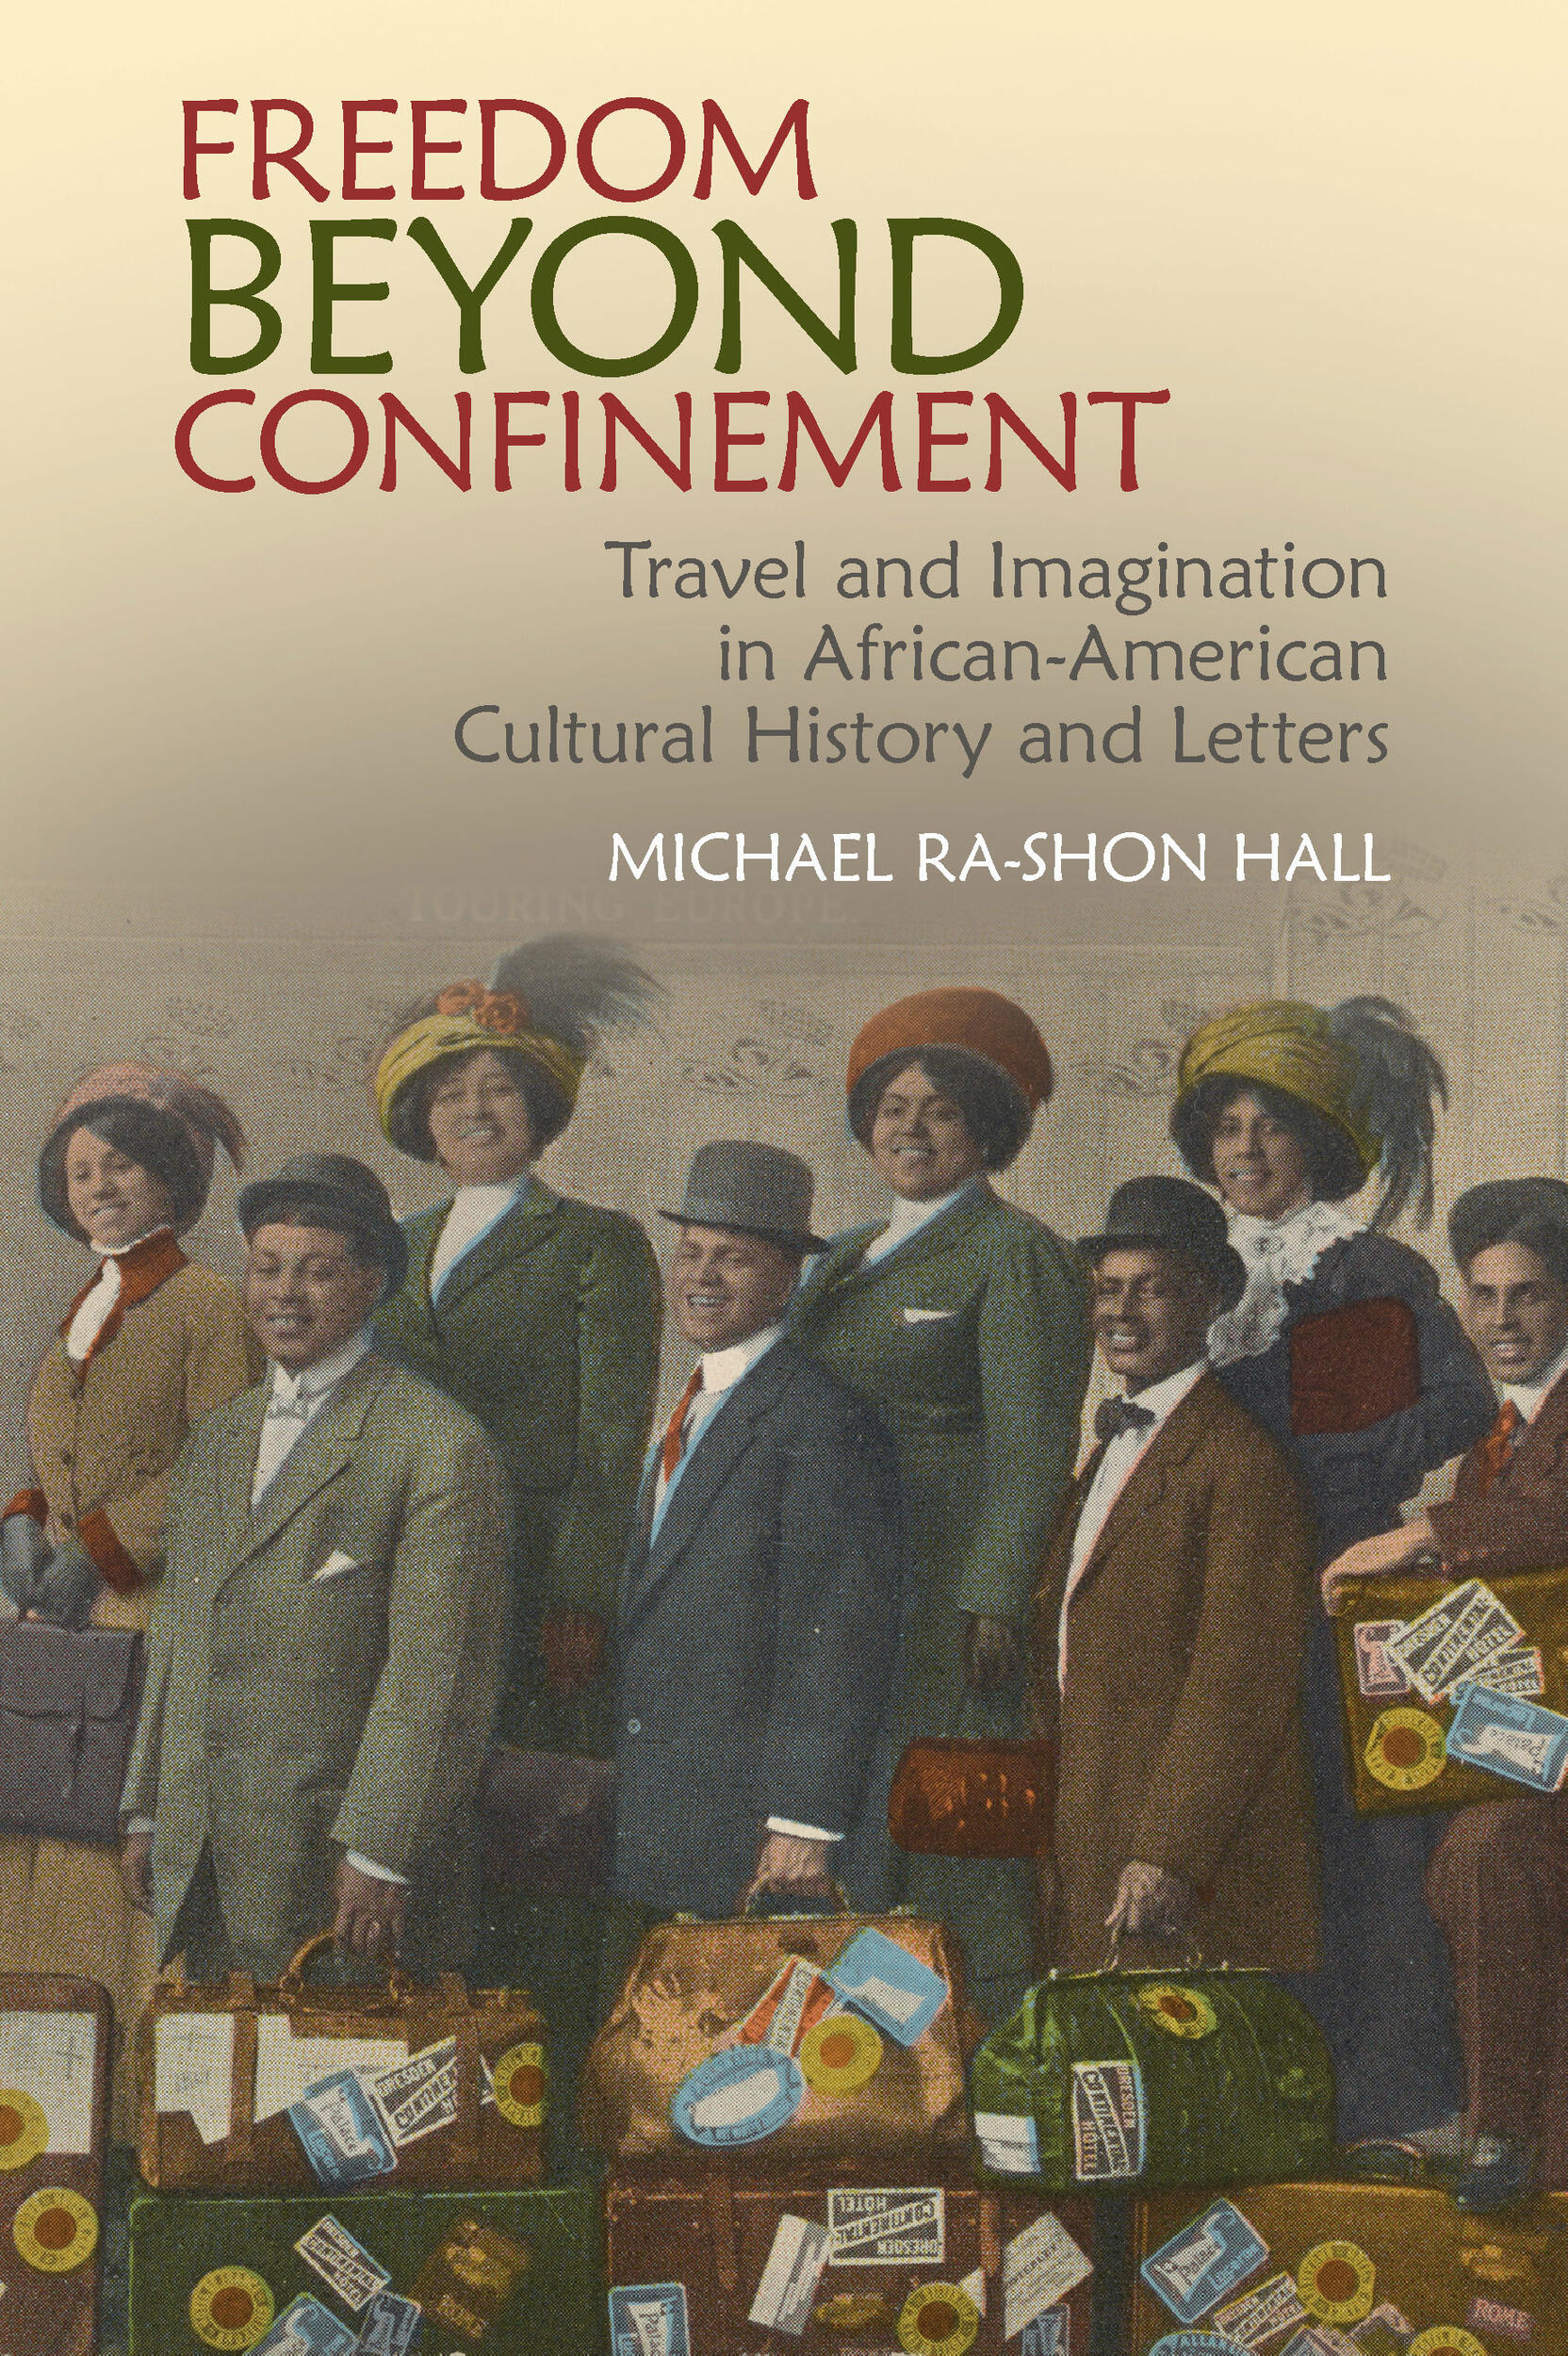 The cover of \"Freedom Beyond Confinement: Travel and Imagination in African American Cultural History and Letters\" by Michael Ra-shon Hall